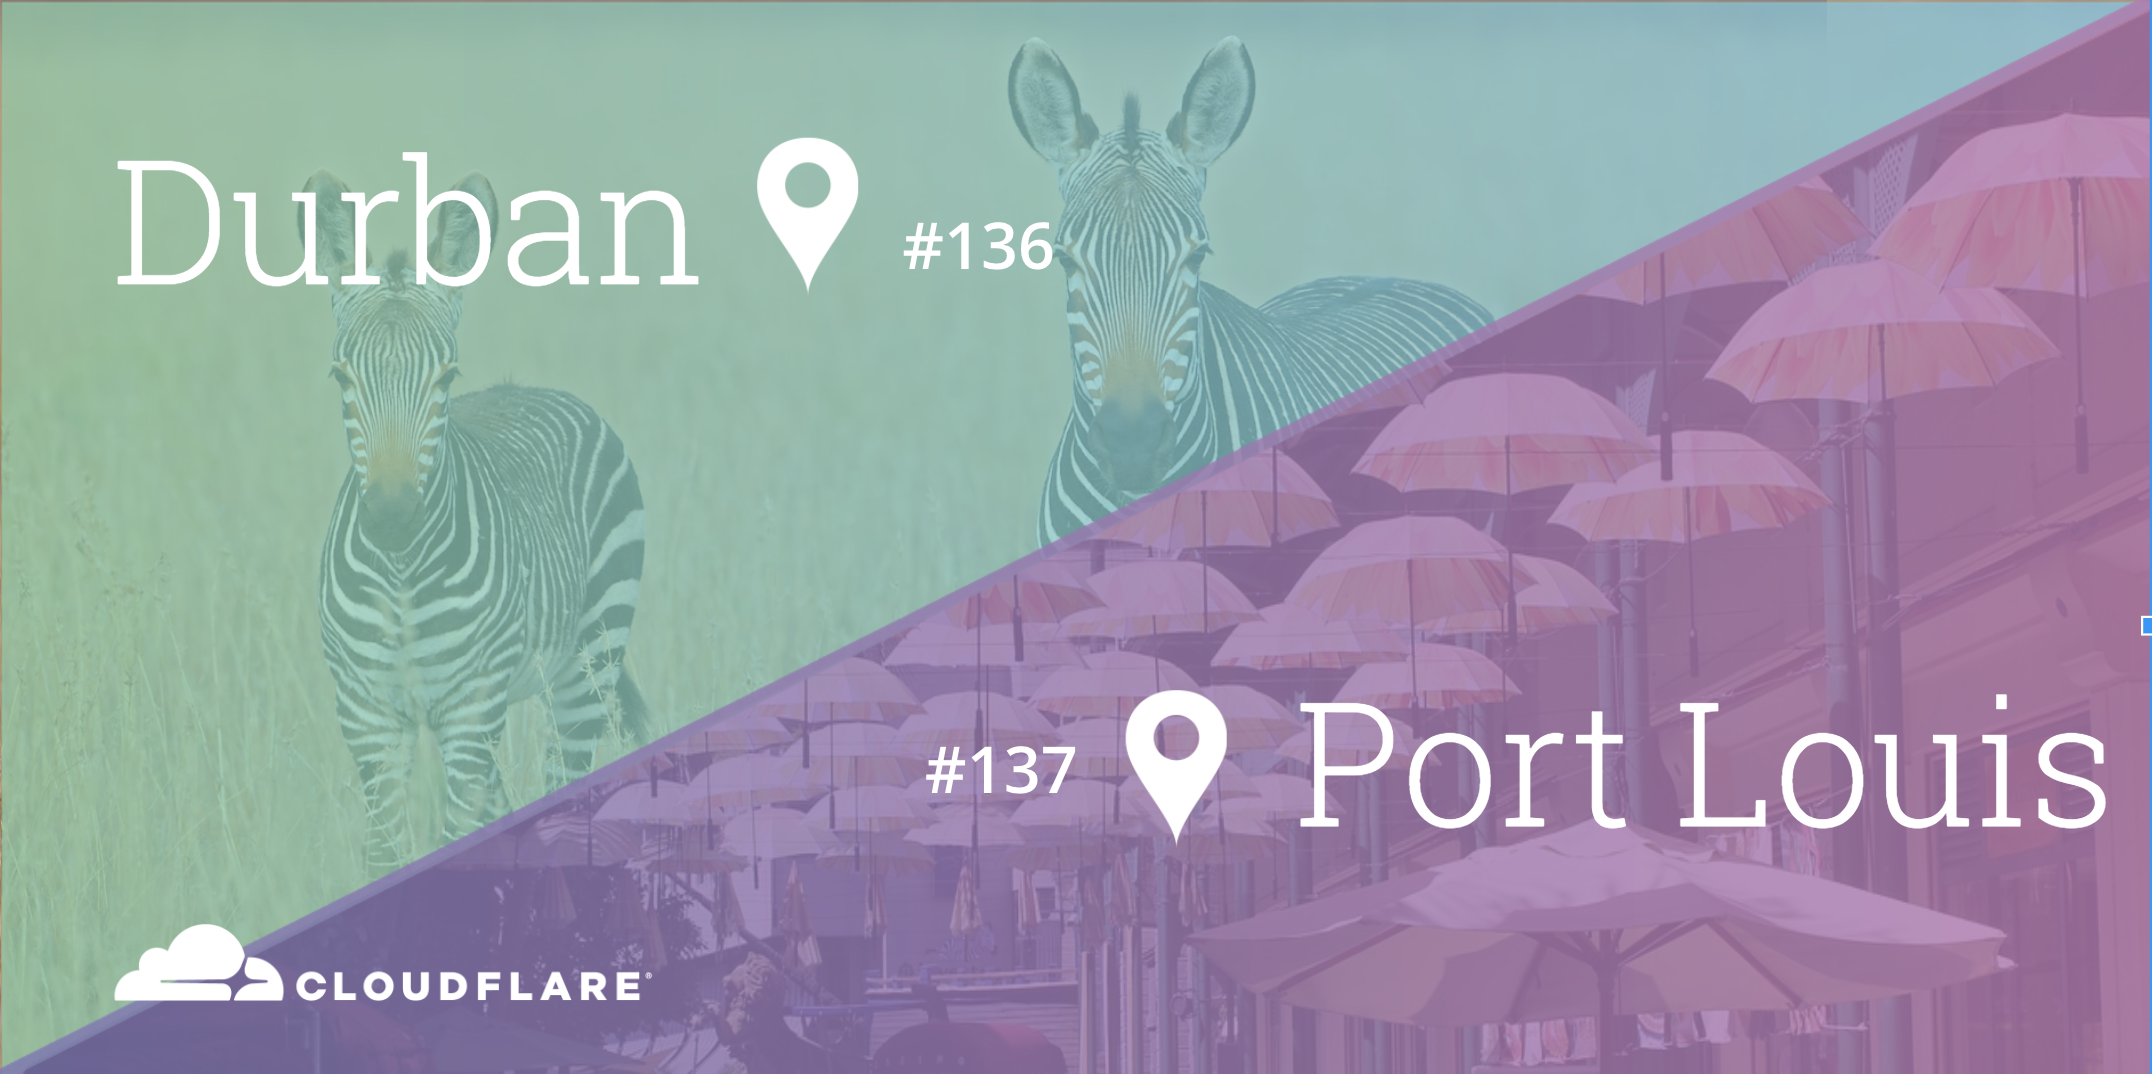 Cloudflare Global Network Spans 137 Cities:
Launching Durban and Port Louis Data Centers